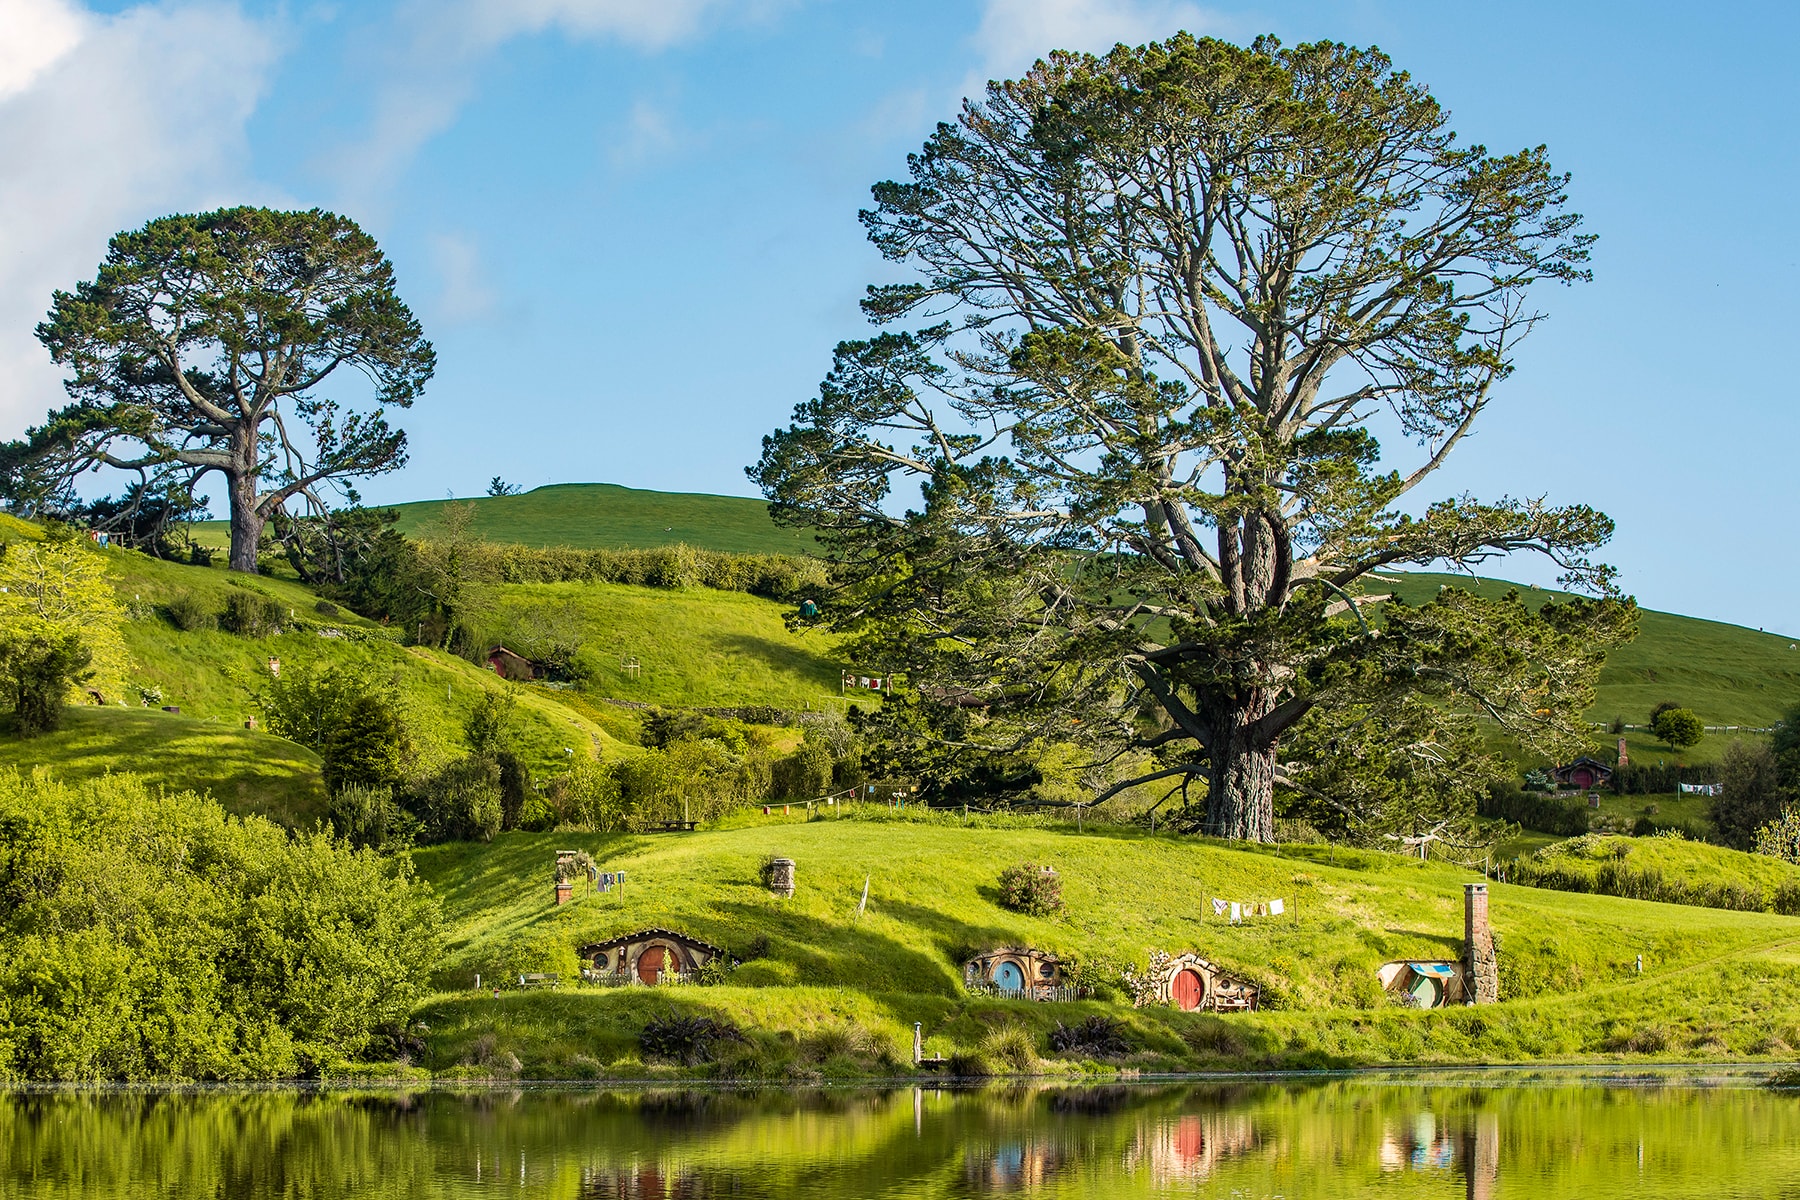 The Hobbit: An Unexpected Journey Airbnb New Zealand Waikato The Lord of the Rings Hobbiton Airbnb The Shire Hobbiton middle earth 